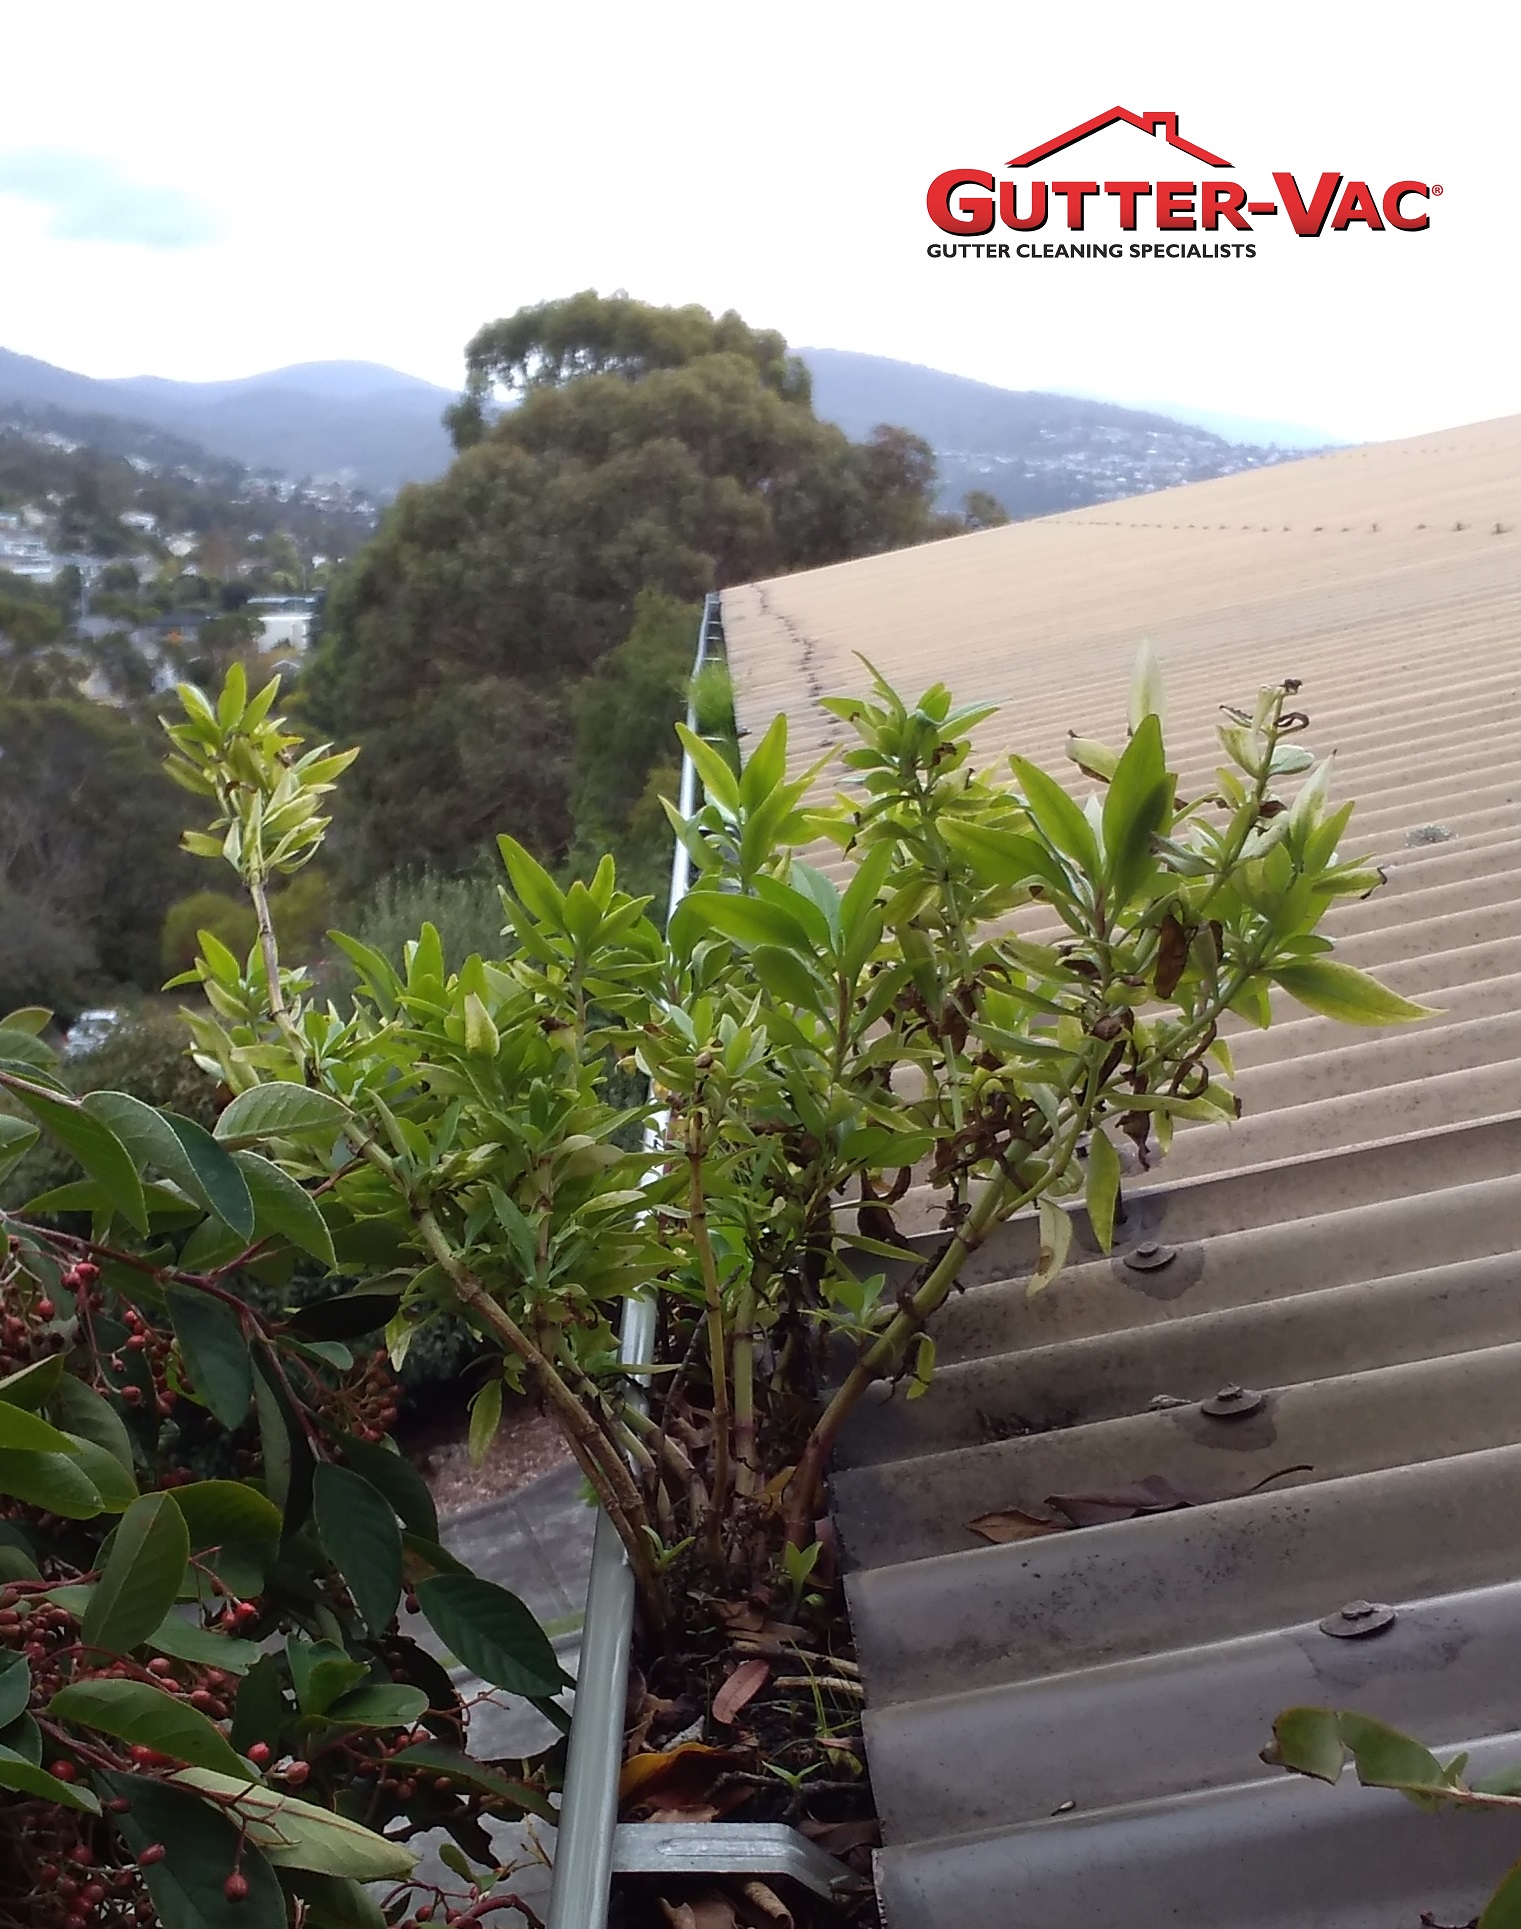 Do You Have Small Trees Growing In Your Gutter?